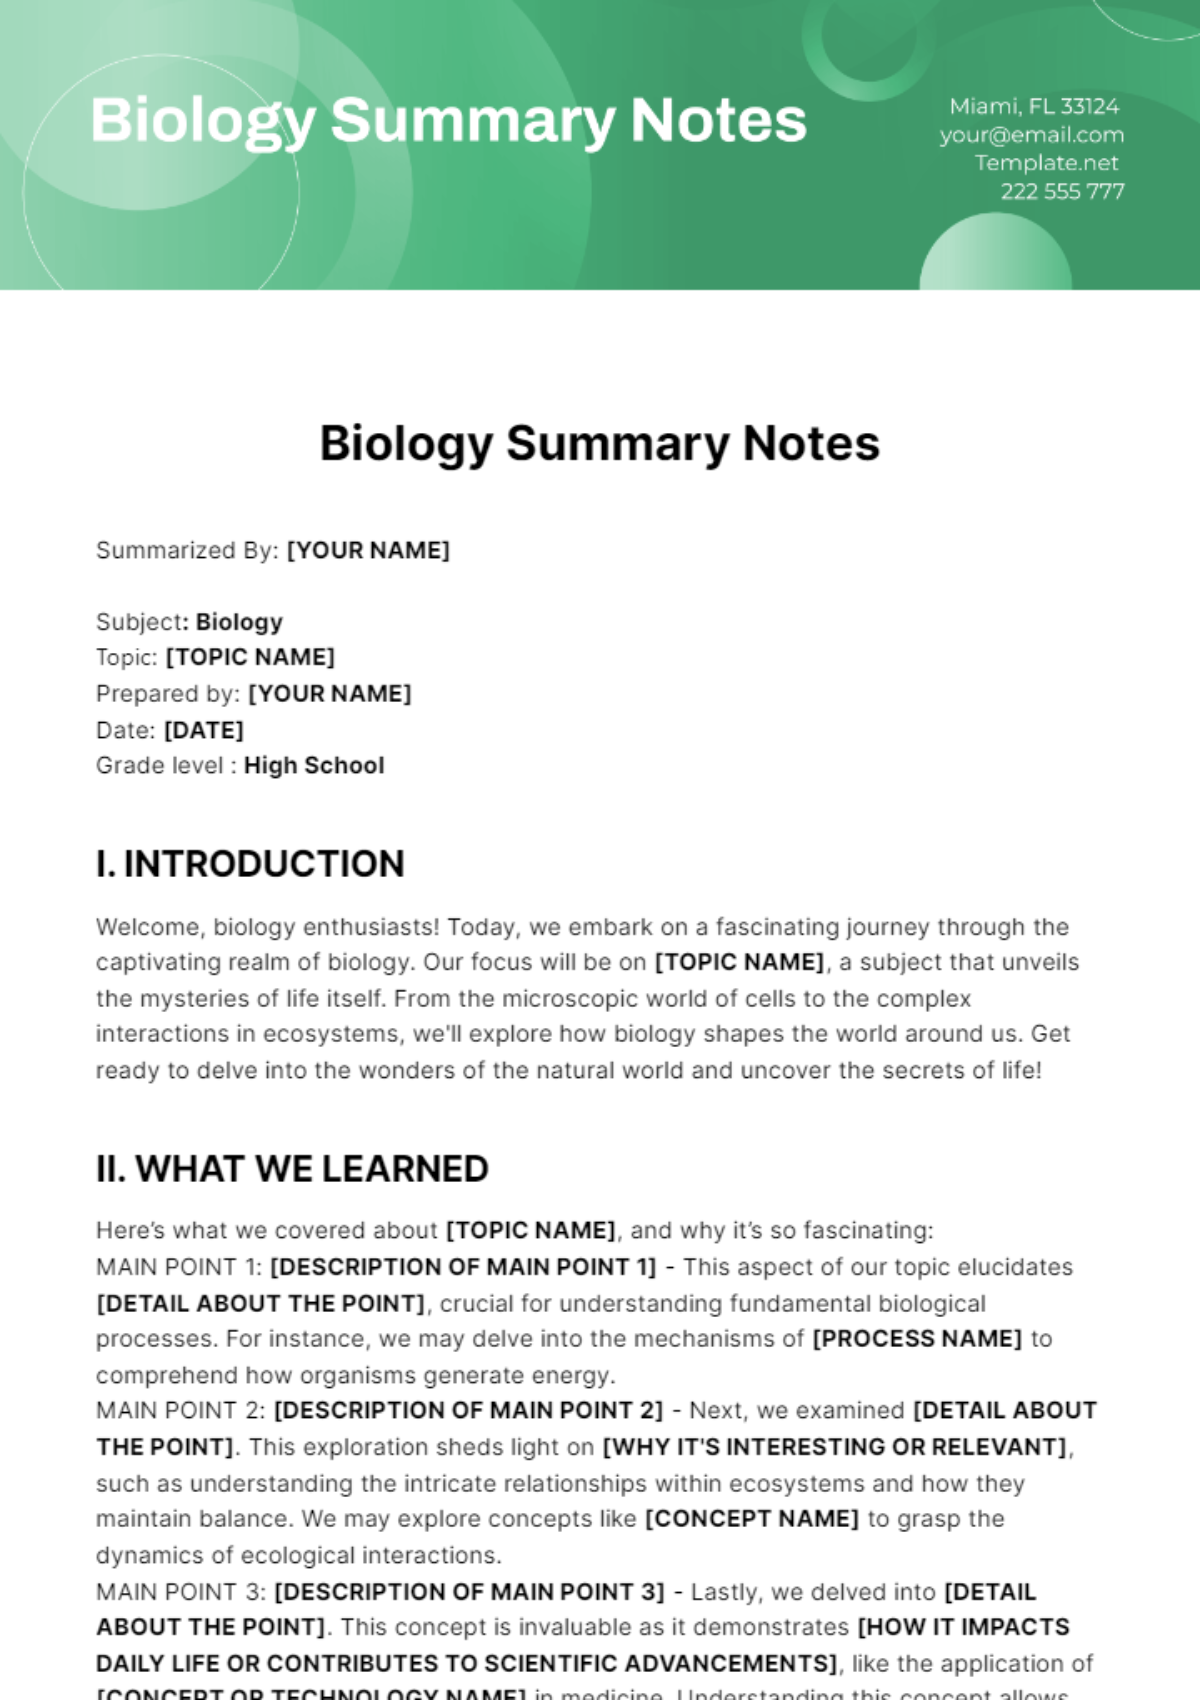 Free Biology Summary Notes Template